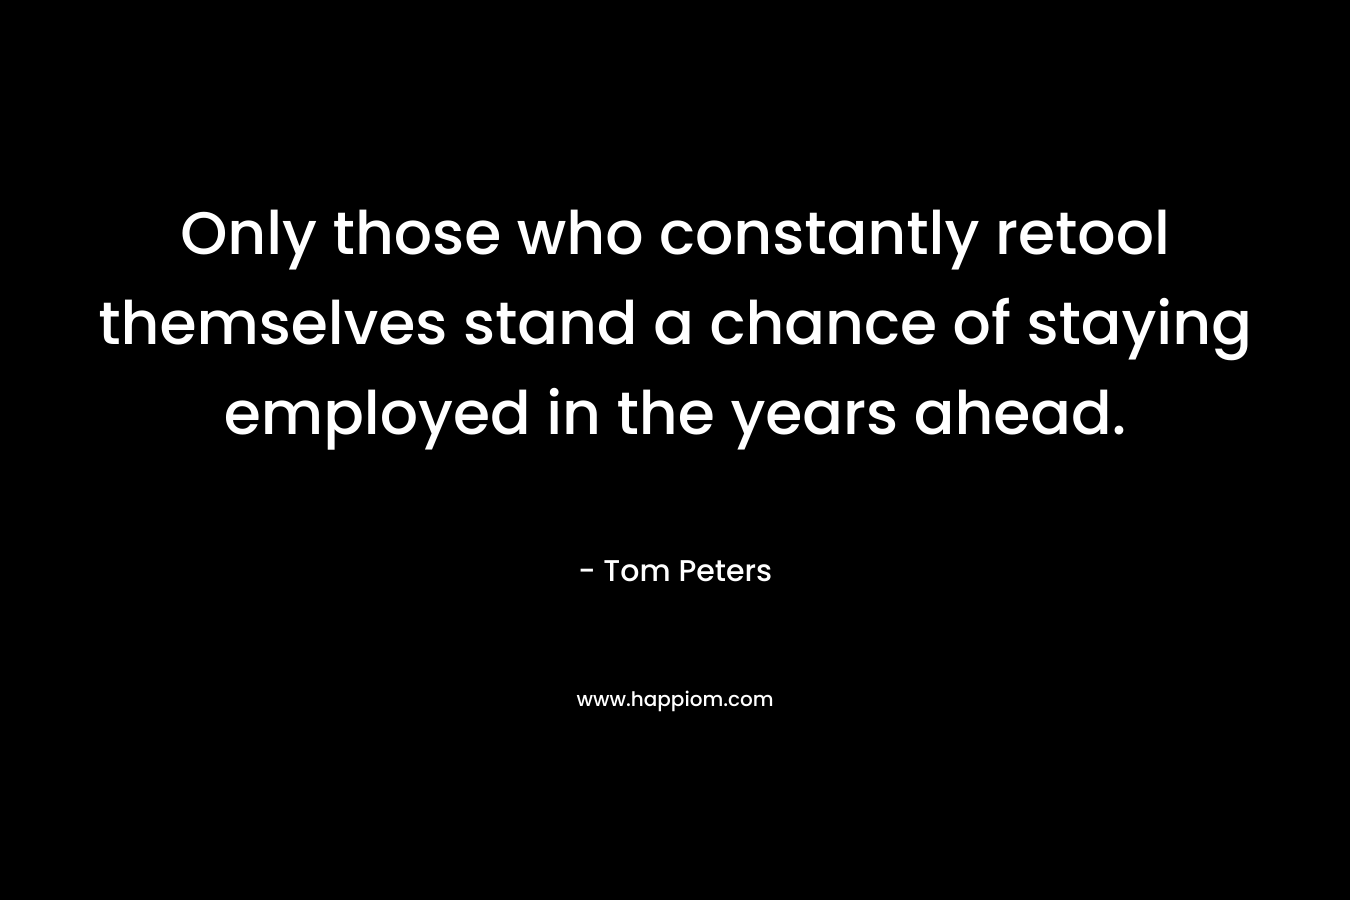 Only those who constantly retool themselves stand a chance of staying employed in the years ahead. – Tom Peters